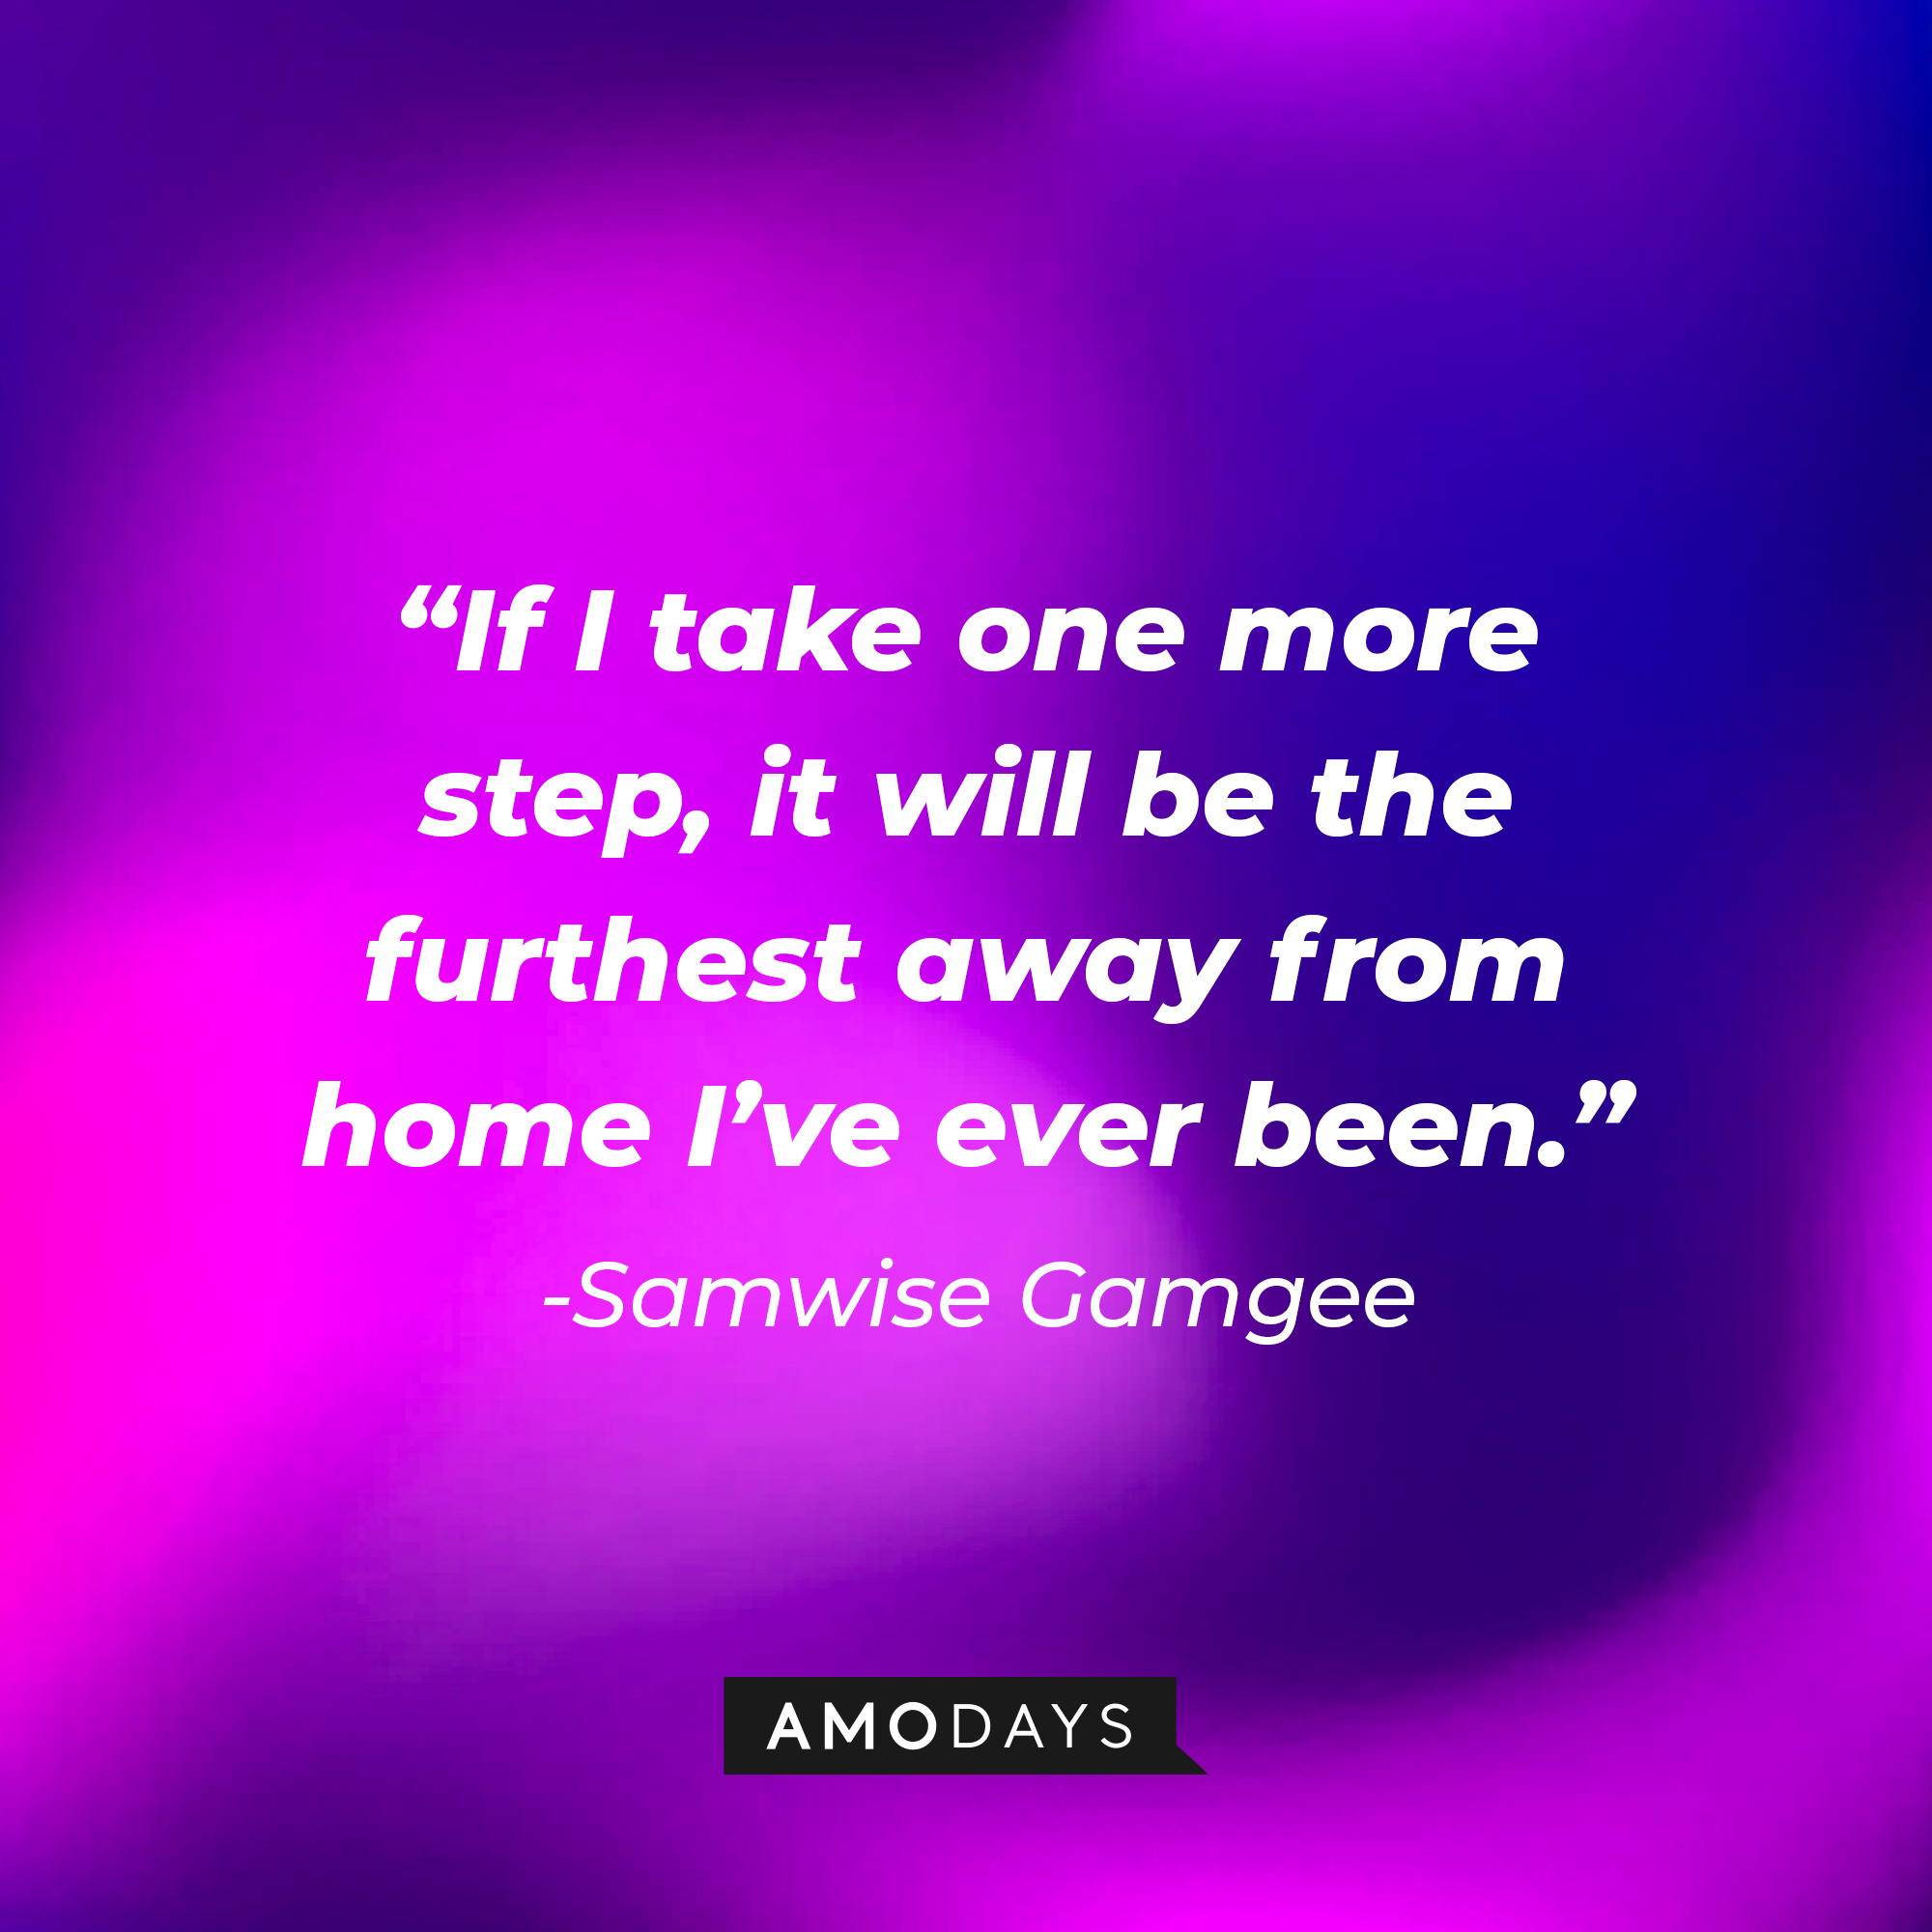 Samwise Gamgee's quote: “If I take one more step, it will be the furthest away from home I’ve ever been.” | Source: Amodays